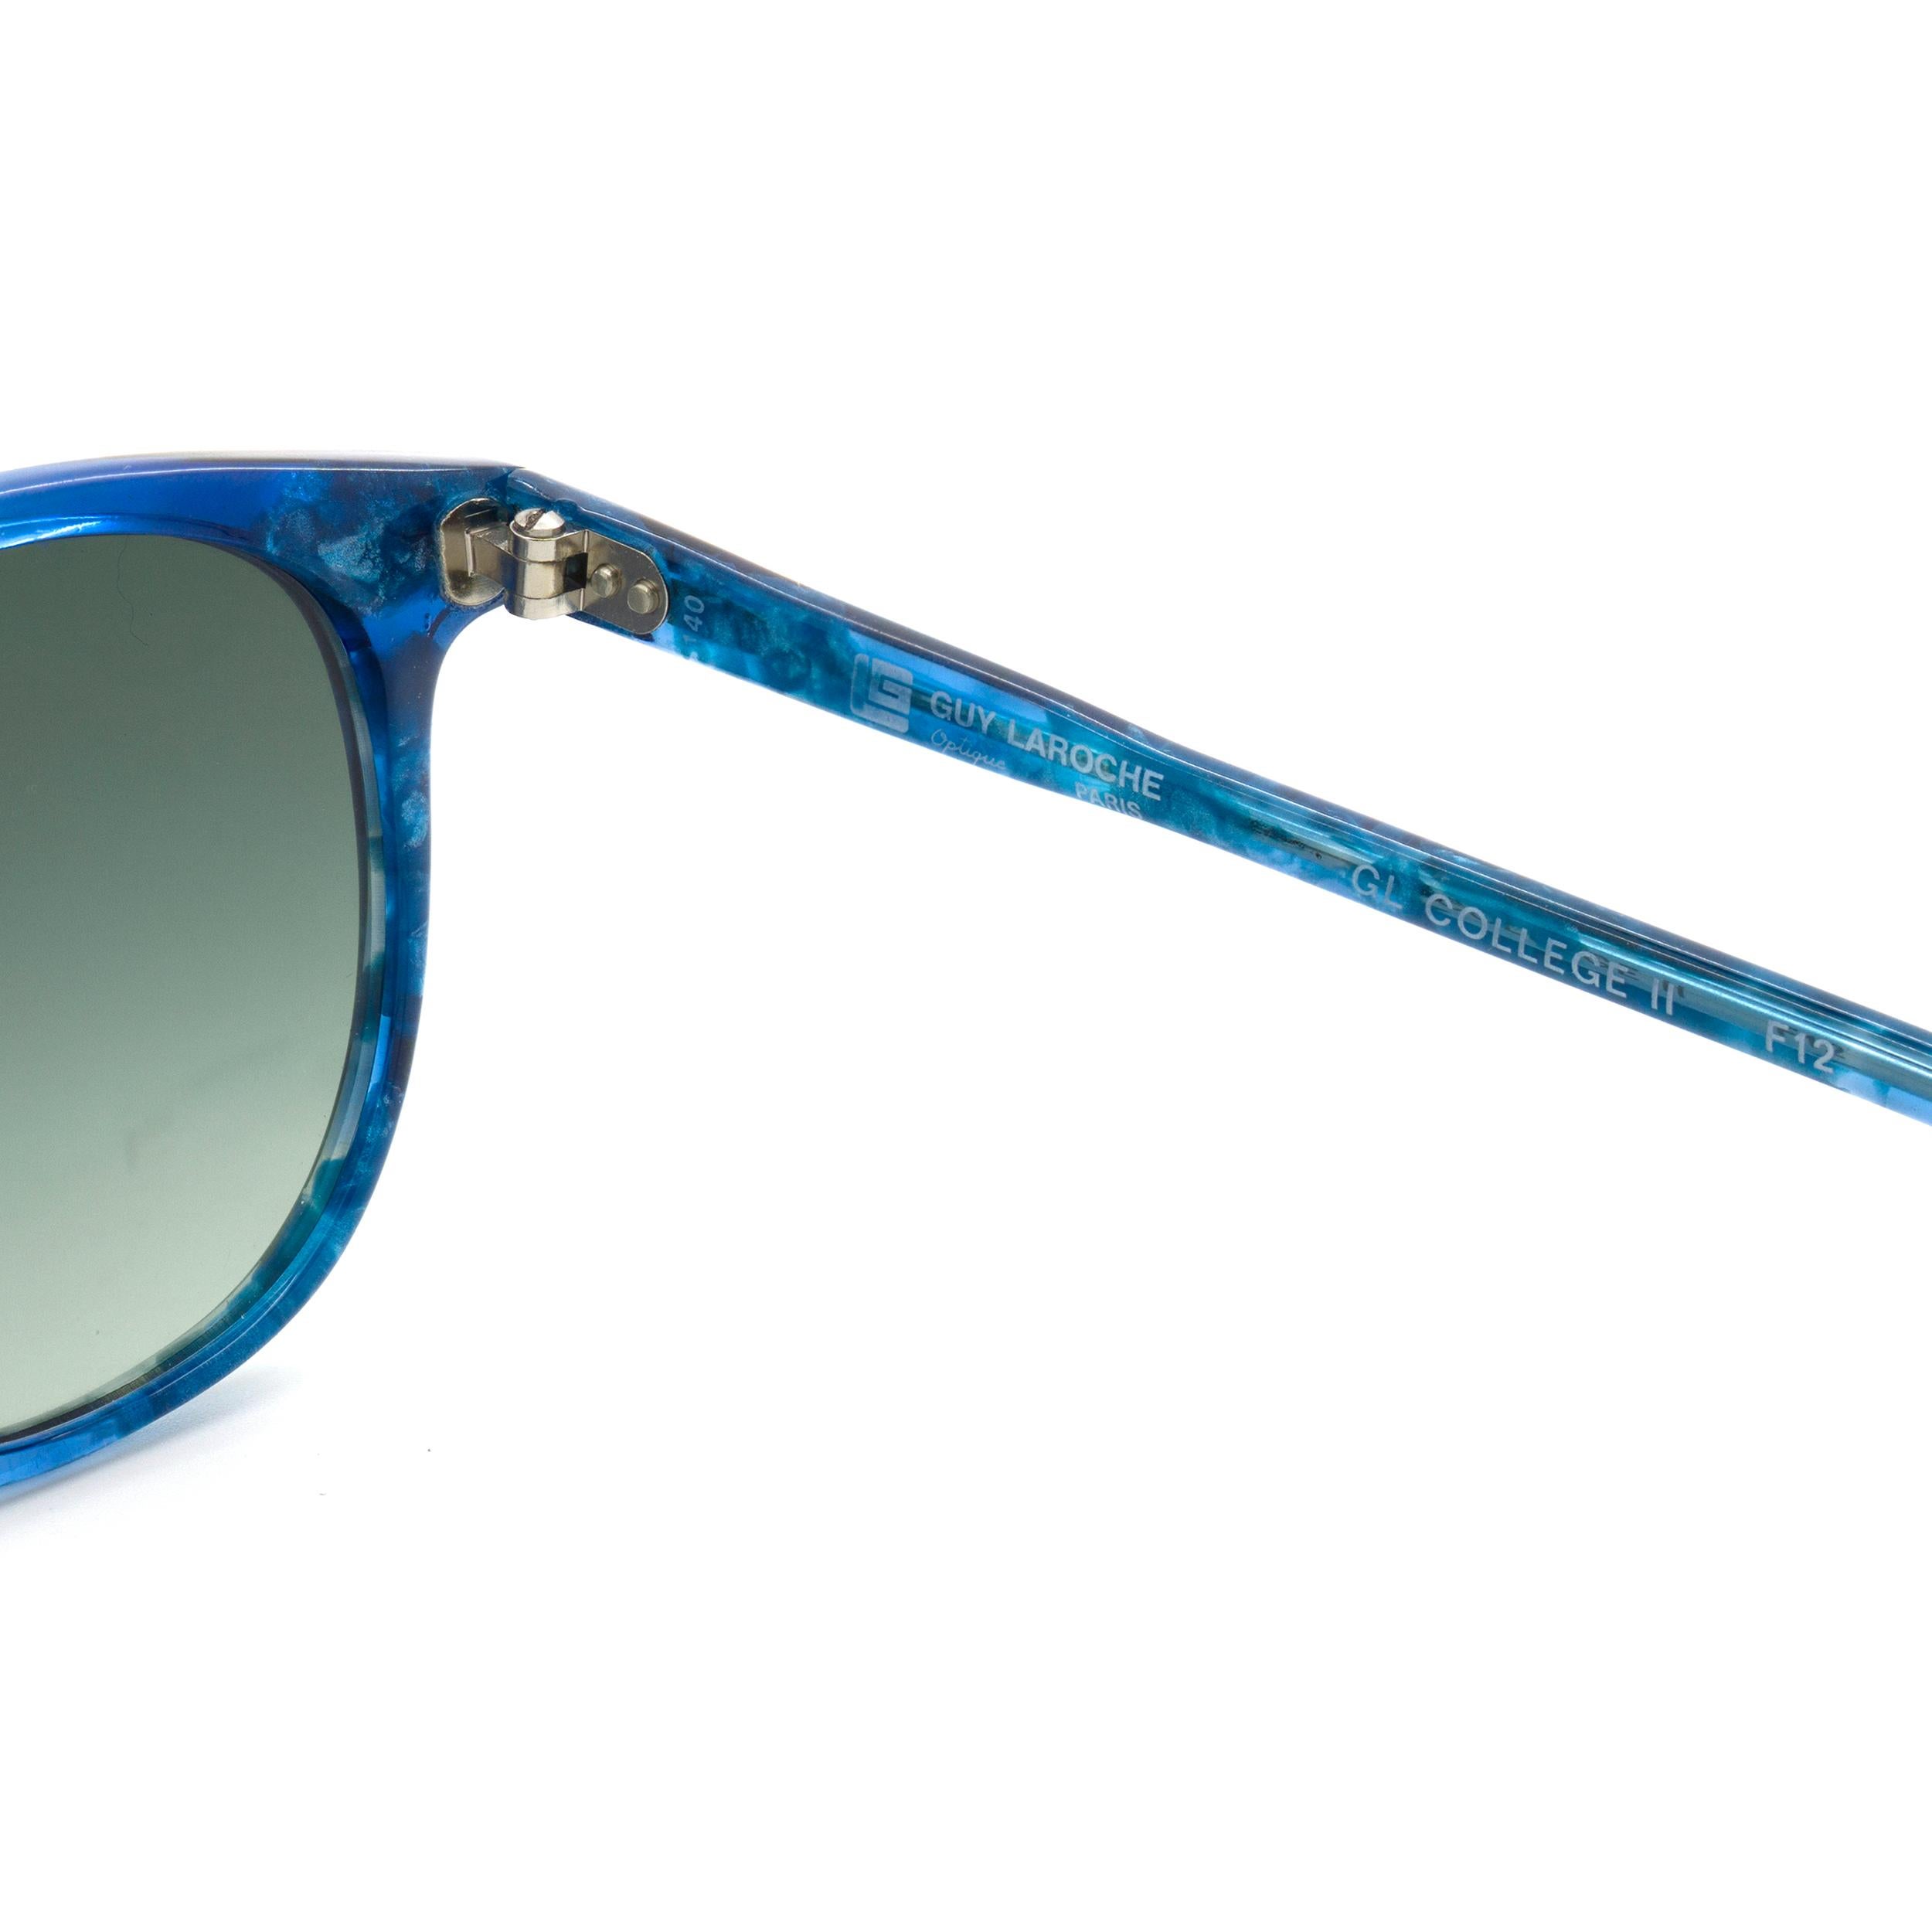 Blue Guy Laroche vintage sunglasses, made in France For Sale